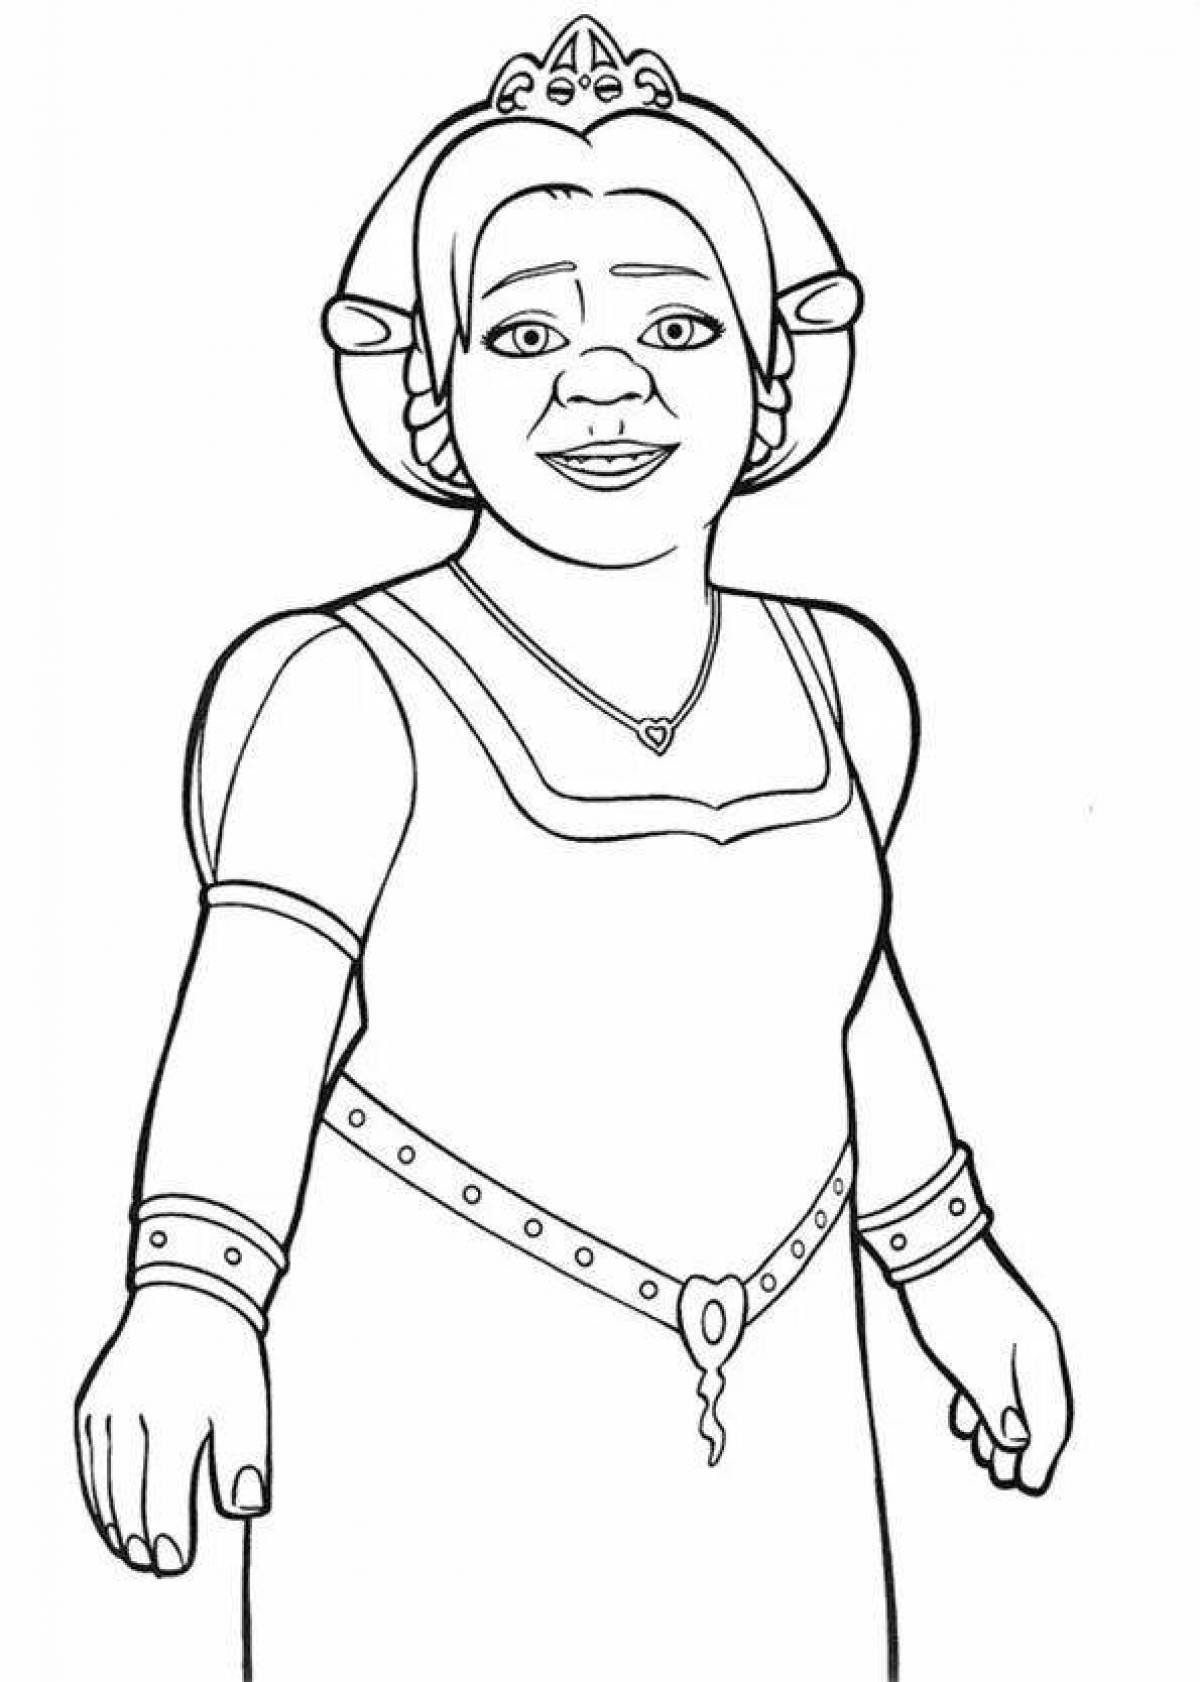 Fiona's enthusiastic coloring page